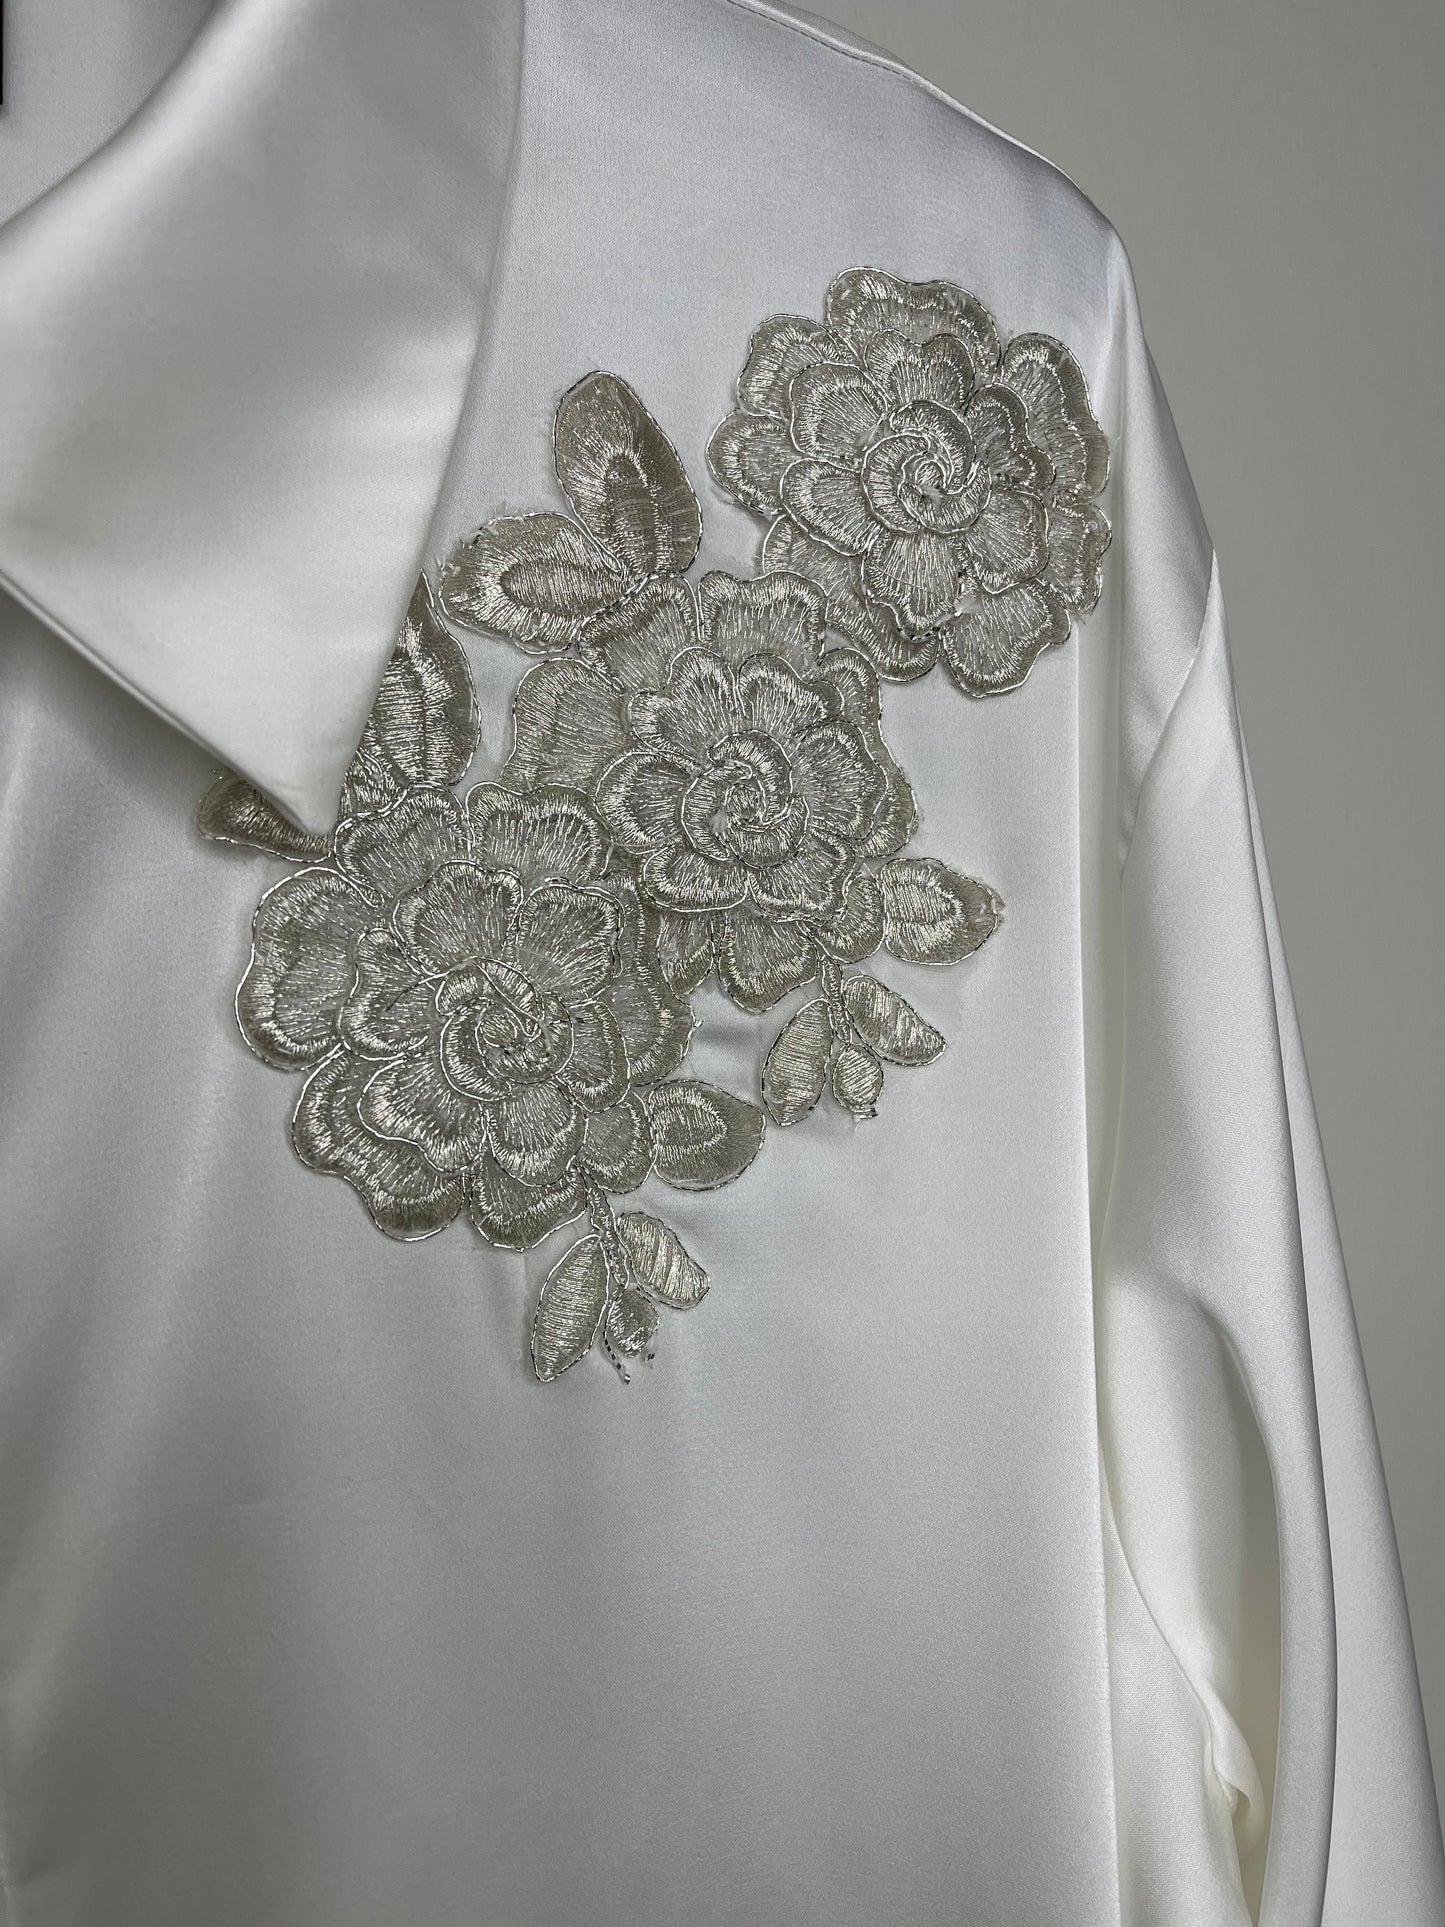 Shirt, Silky Ivory, Silver Lace Flowers